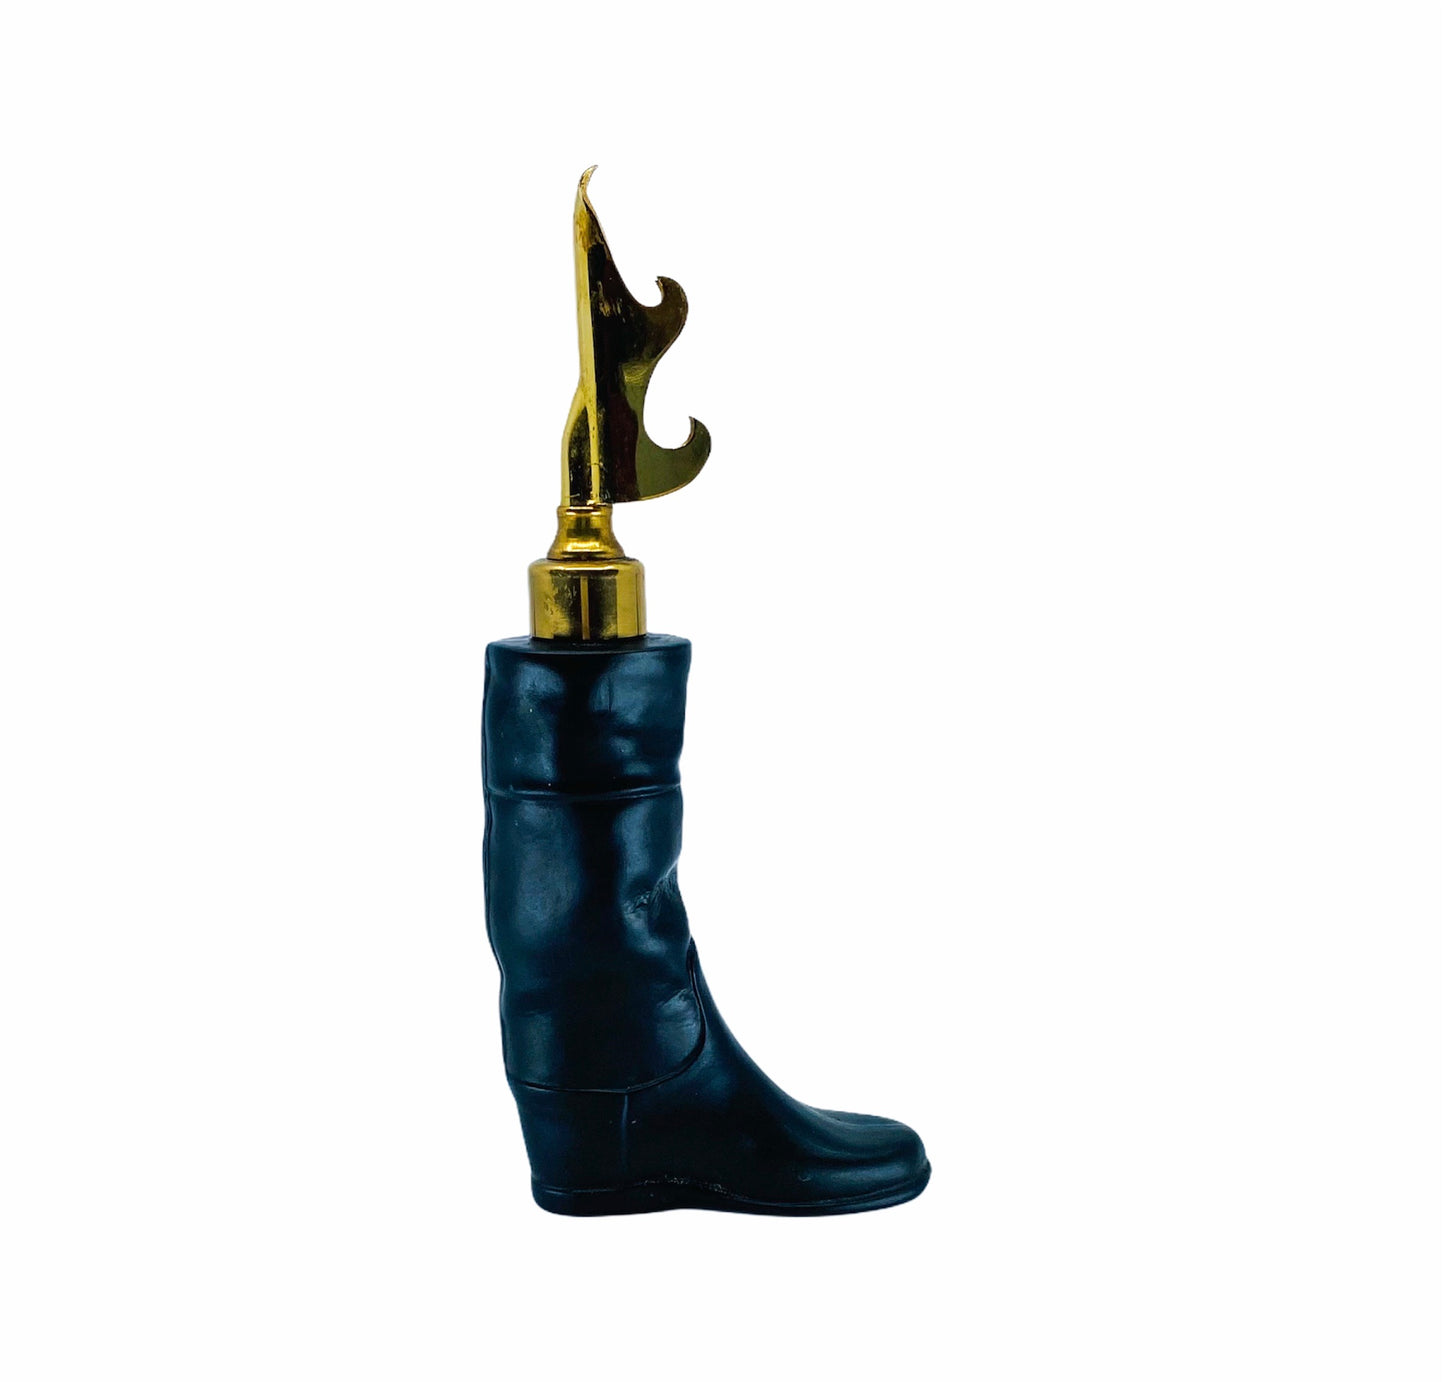 1990s Riding Boot Bottle Opener by Evans